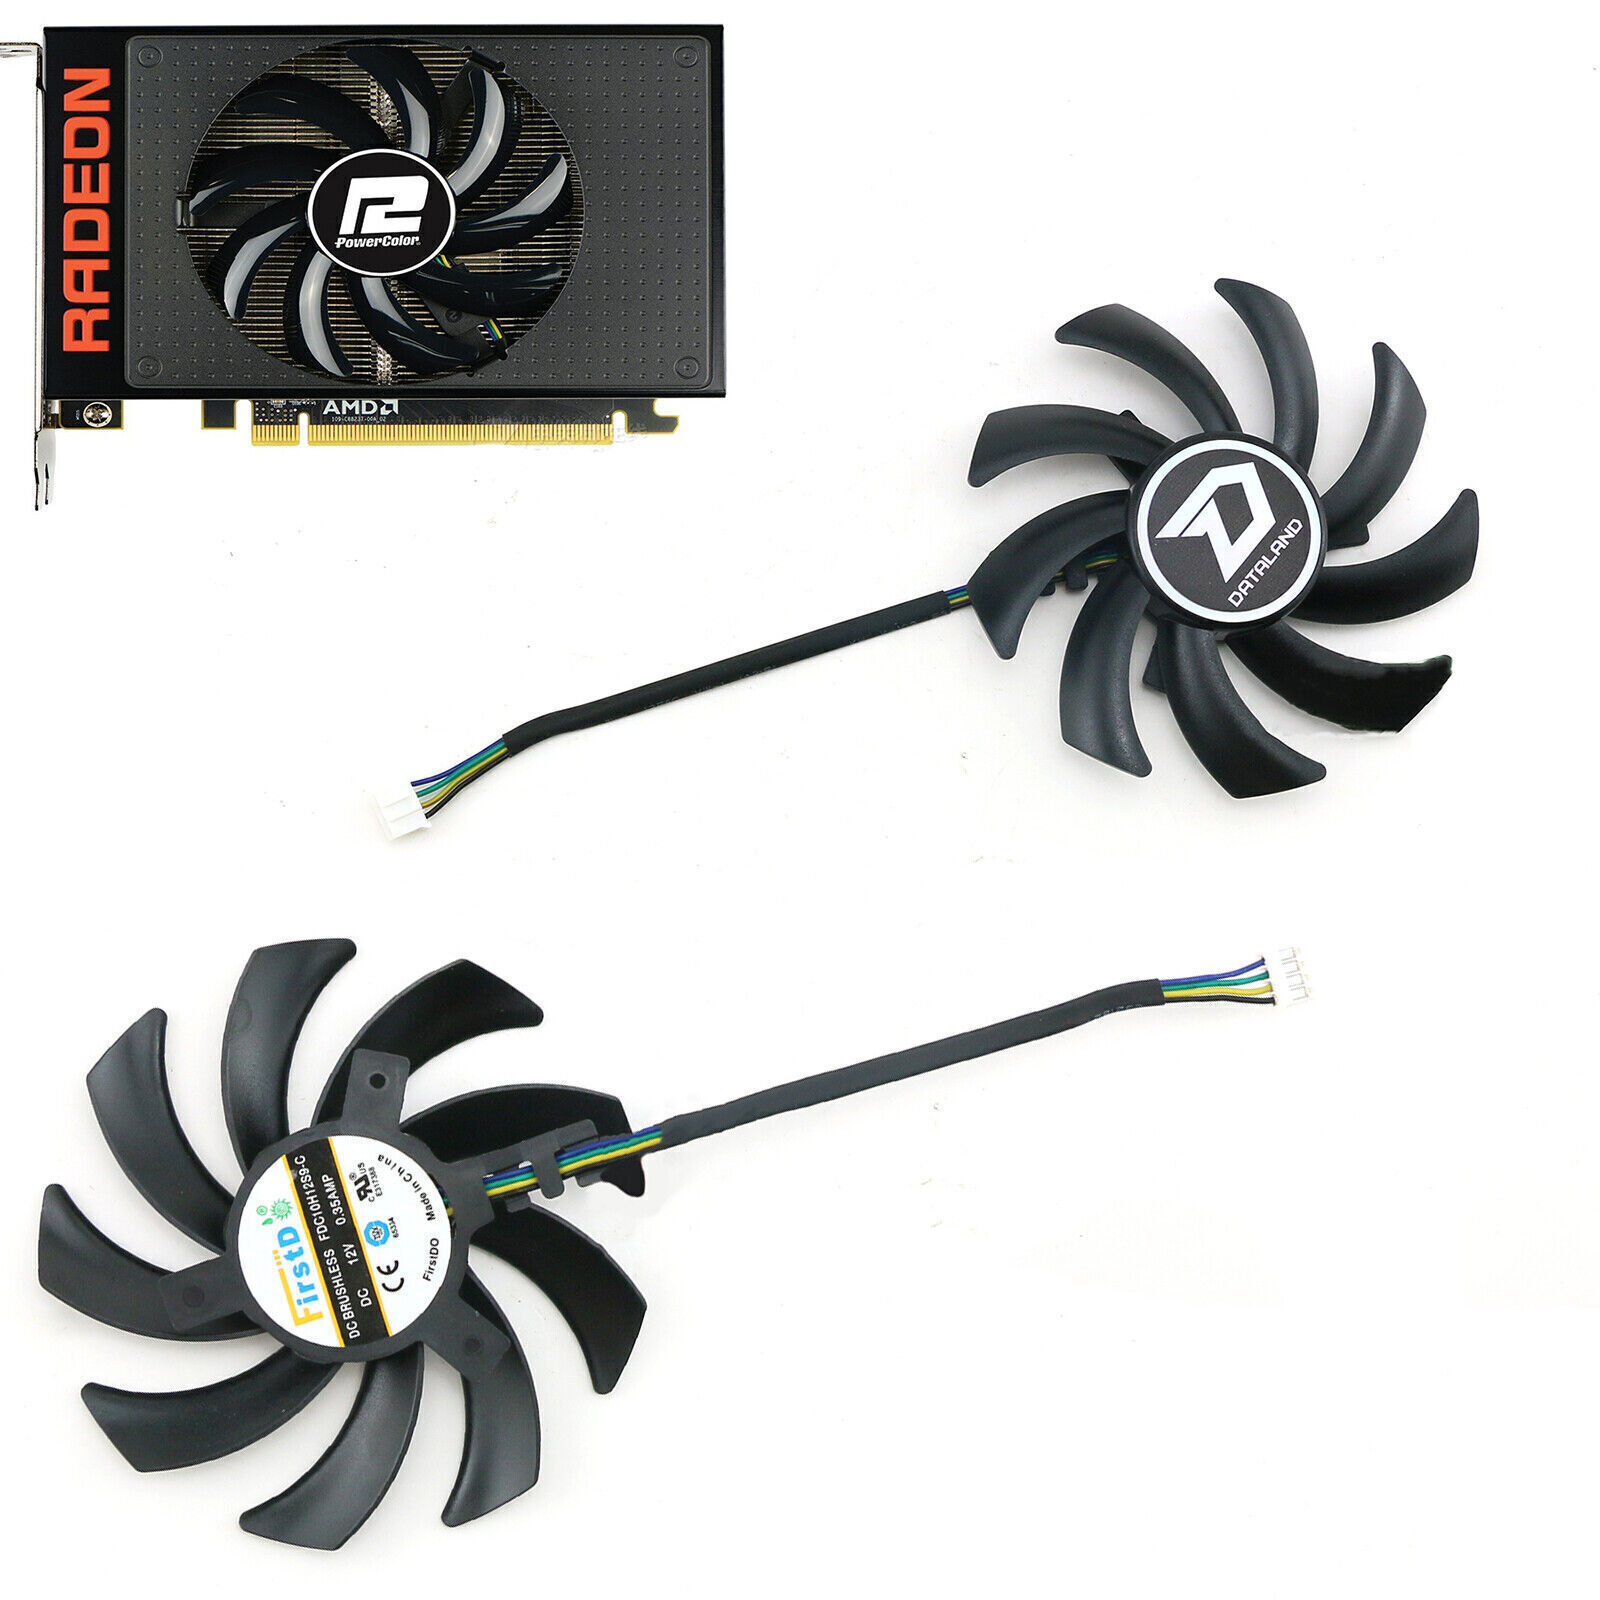 FDC10H12D9-C Graphics Cooling Fan for AMD/Dylan/ASUS R9 Nano 4G HBM Video Card